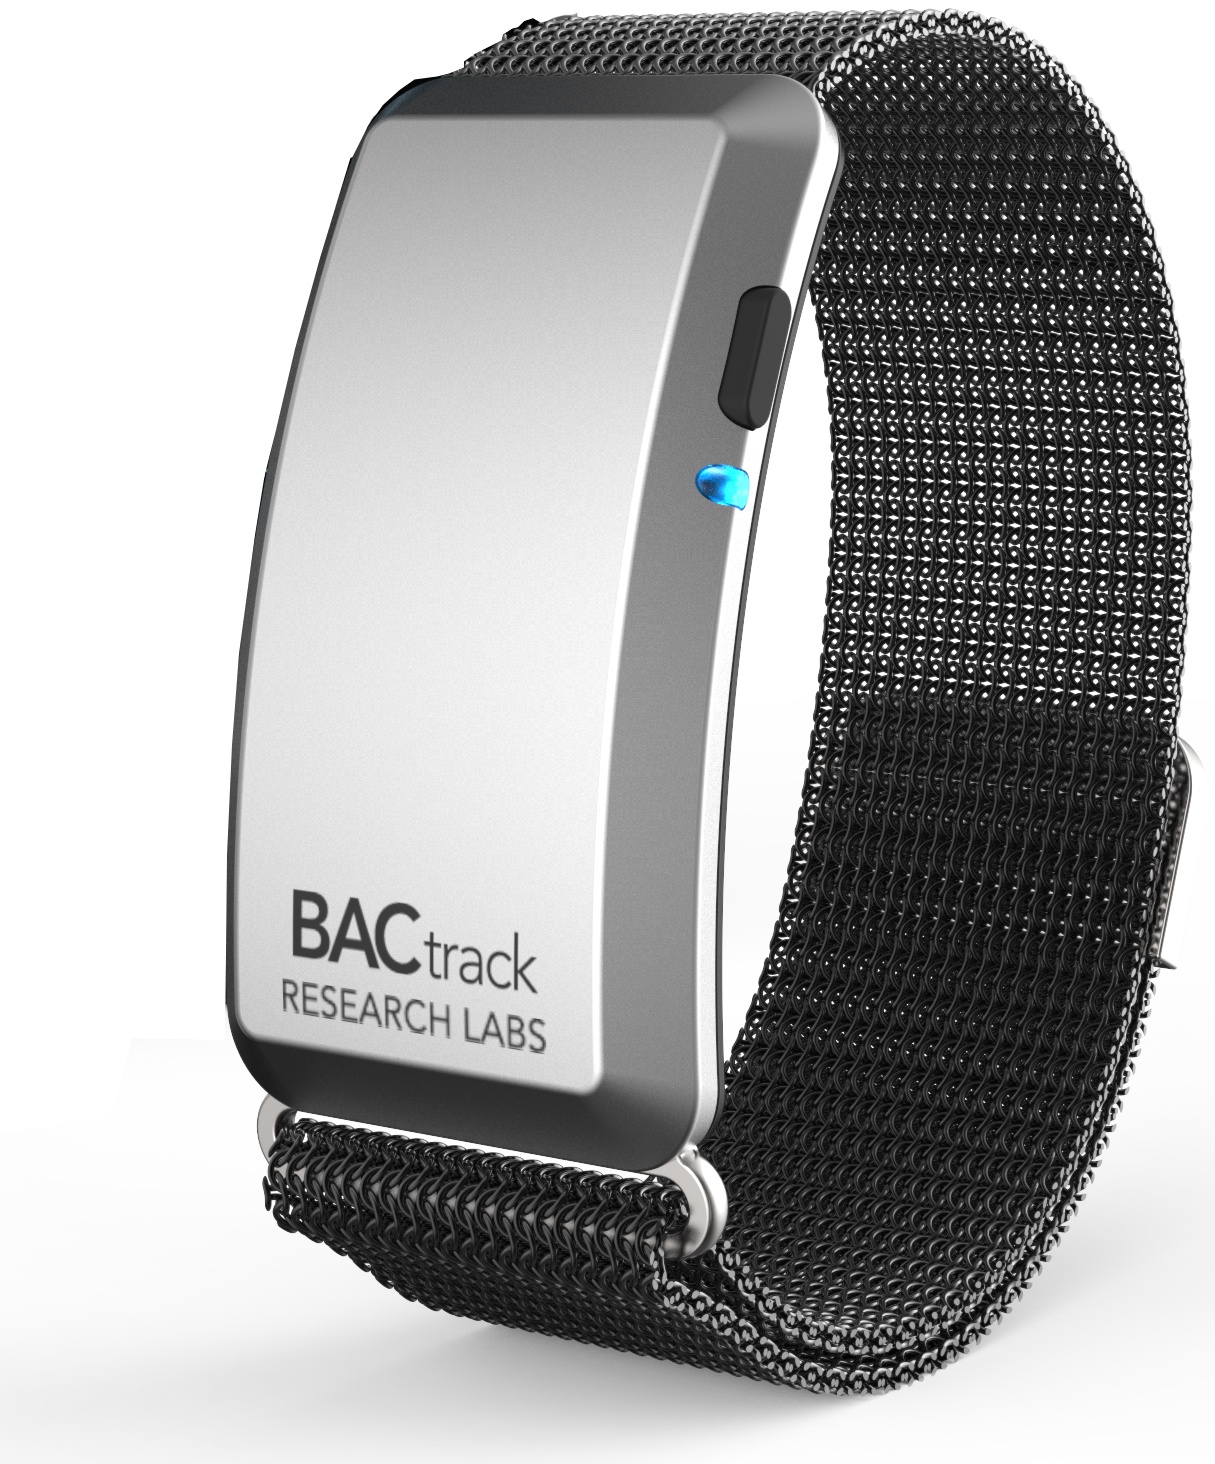 Custom dry transfers are used by industrial designers, this example shows a rubdown transfer applied to an electronic watch band or iwatch